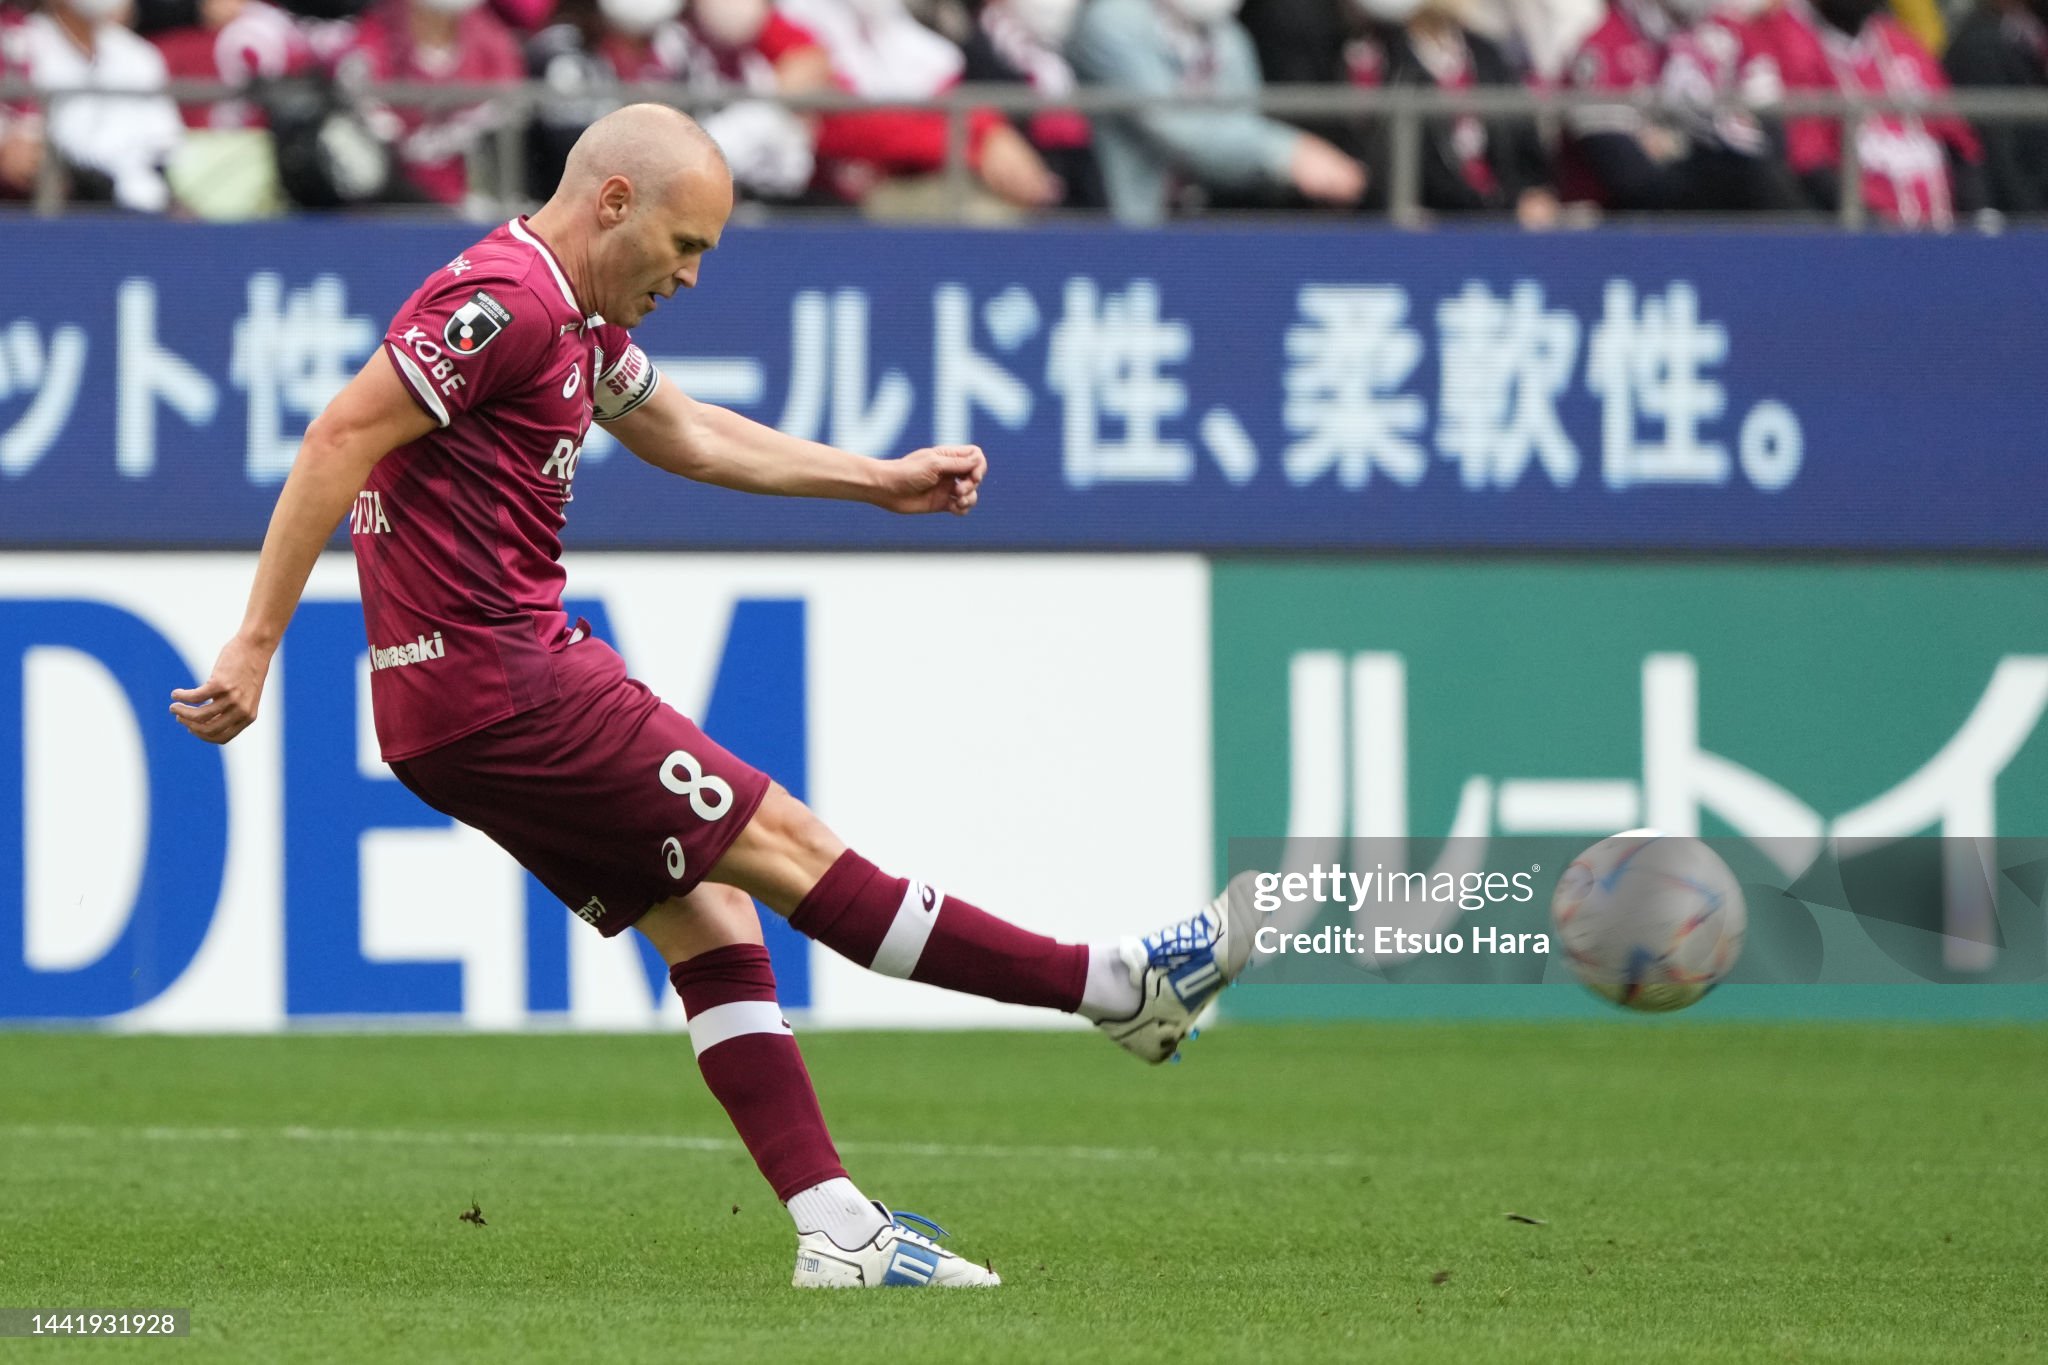 'Iniesta has fitting opponent for his final match in Japan'